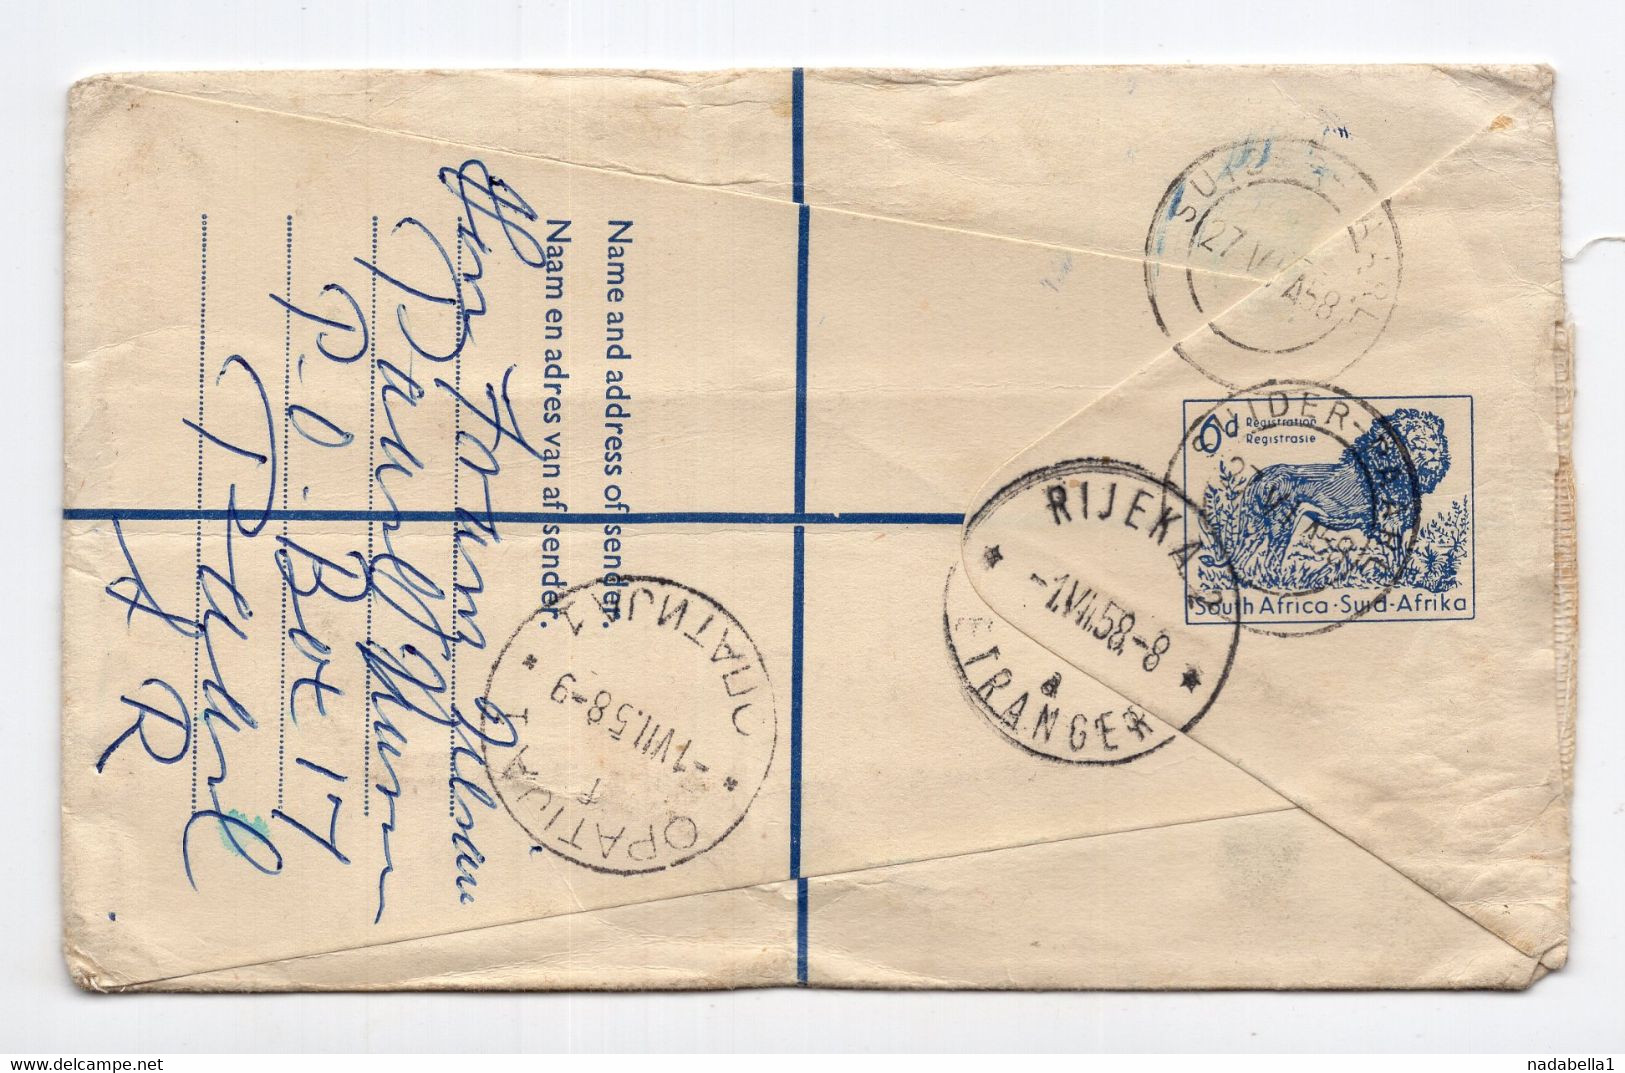 1958. SOUTH AFRICA,SUIDER-PAARL TO YUGOSLAVIA,REGISTERED AIRMAIL COVER TO OPATIJA,CROATIA - Luchtpost